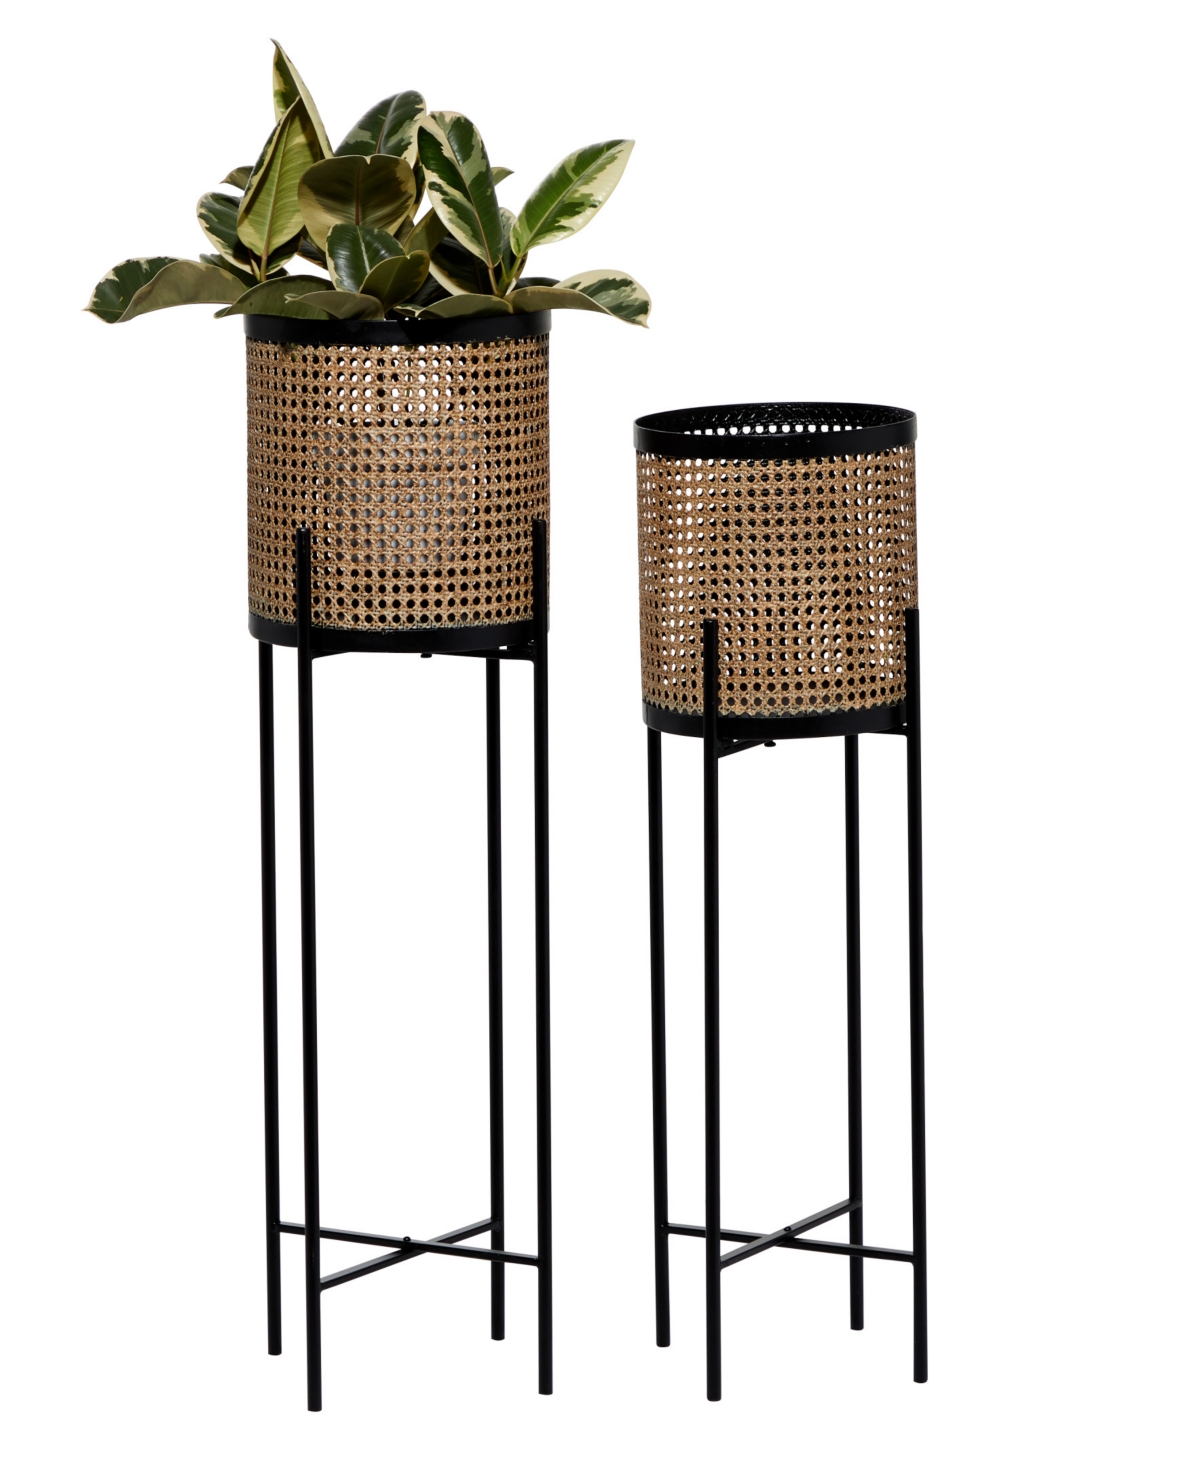 Gold-Tone Metal Indoor Outdoor Planter with Removable Stand Set of 2 - Gold